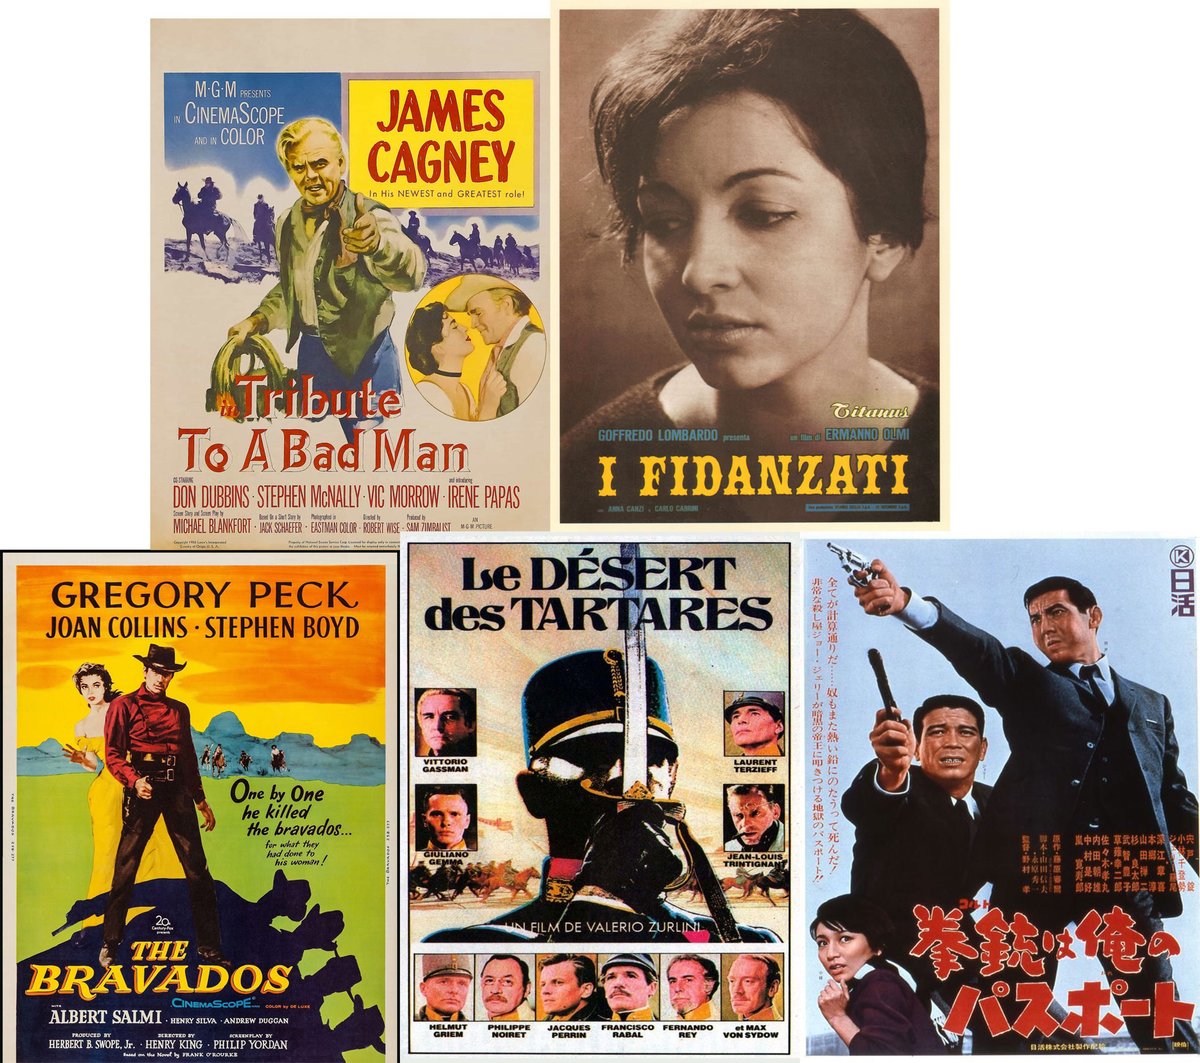 Best films watched in March: The Fiances (1963) – Ermanno Olmi The Desert of the Tartars (1976) – Valerio Zurlini The Bravados (1958) – Henry King Tribute to a Bad Man (1956) – Robert Wise Youth of the Beast (1963) – Seijun Suzuki